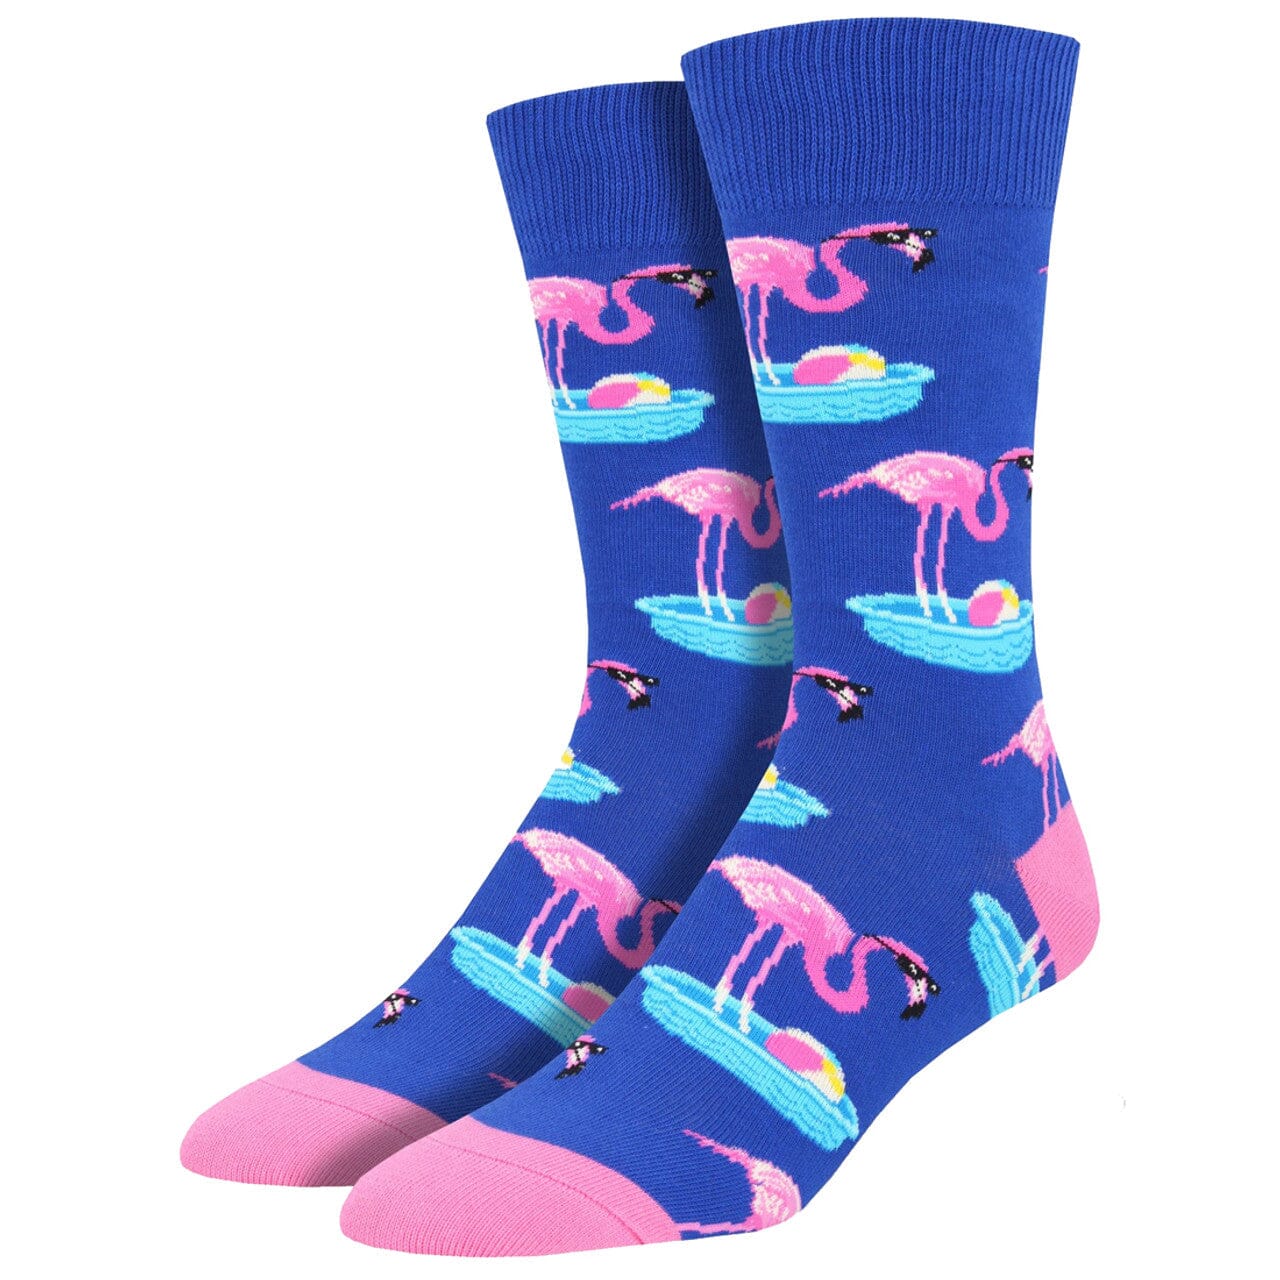 Fun Colorful Flamingo Patterned Novelty Socks for Men Women and Teens